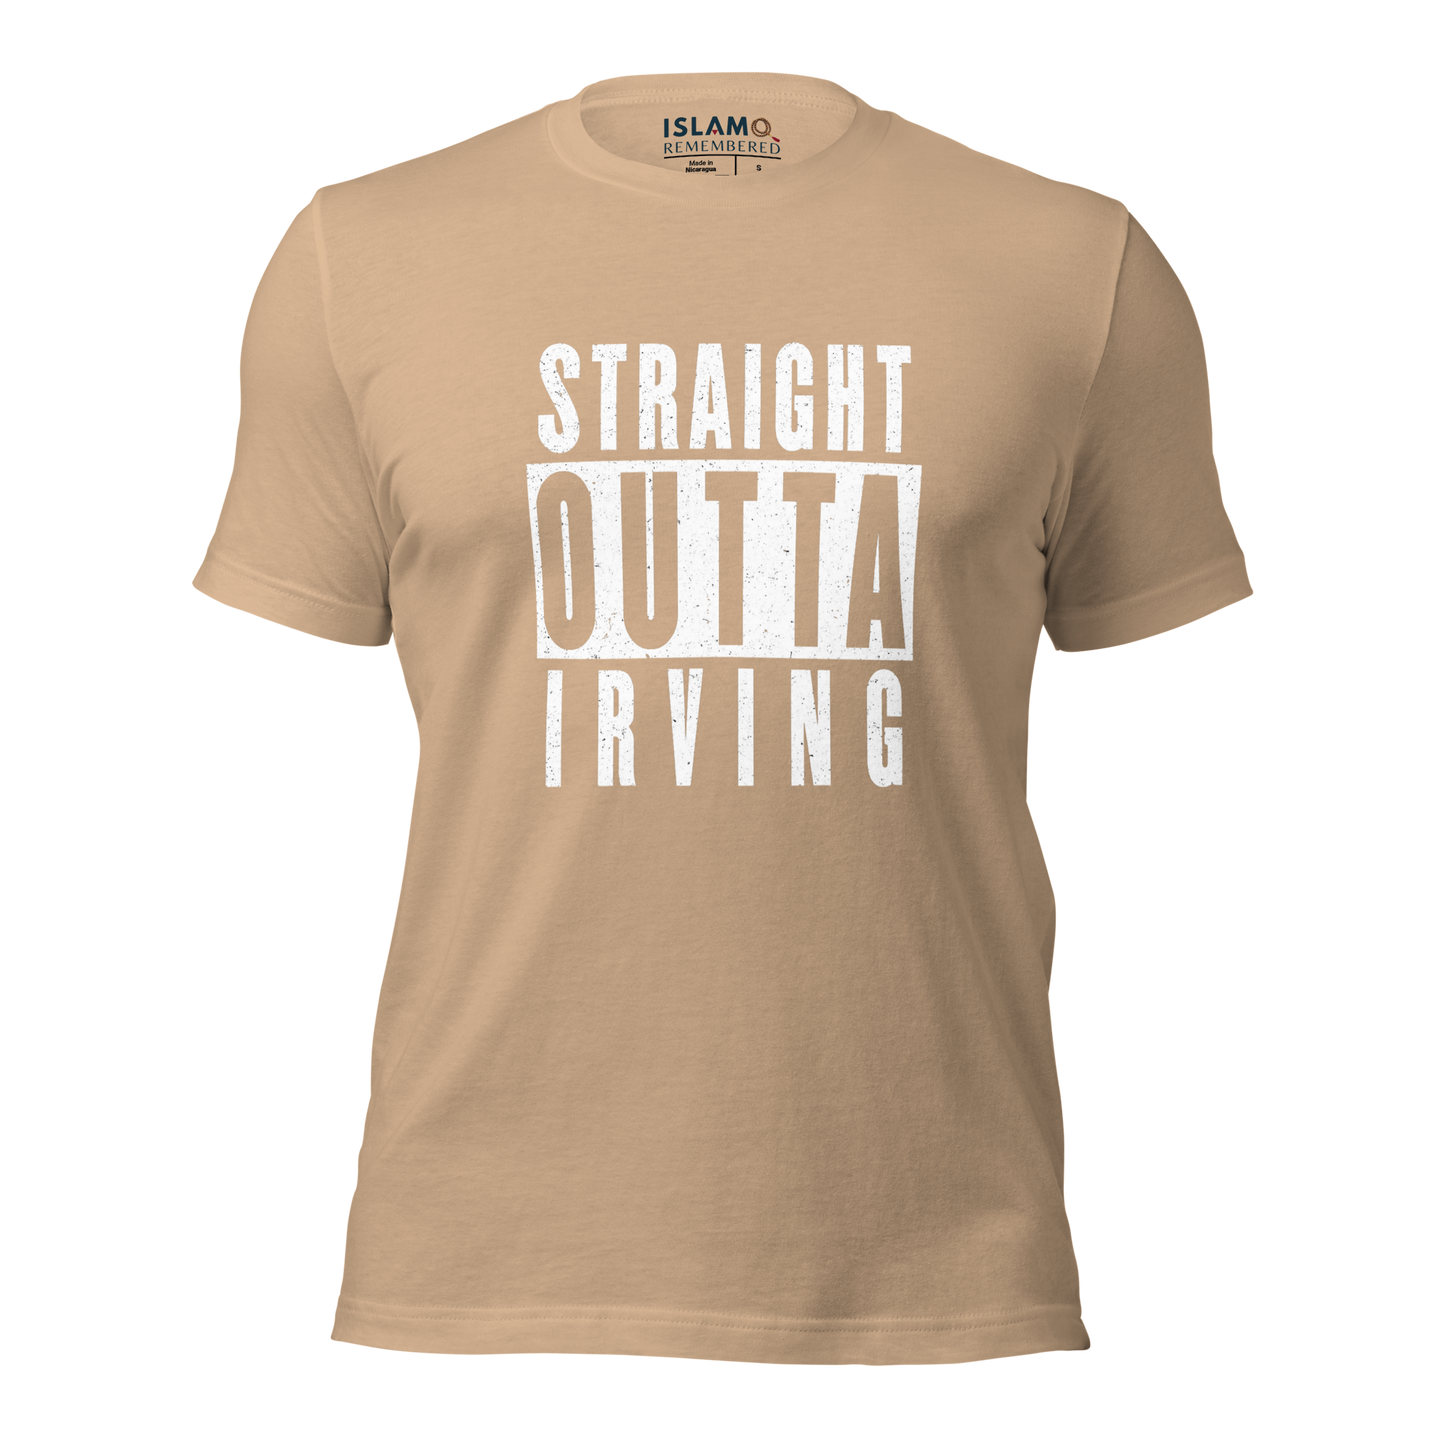 ADULT T-Shirt - STRAIGHT OUTTA IRVING